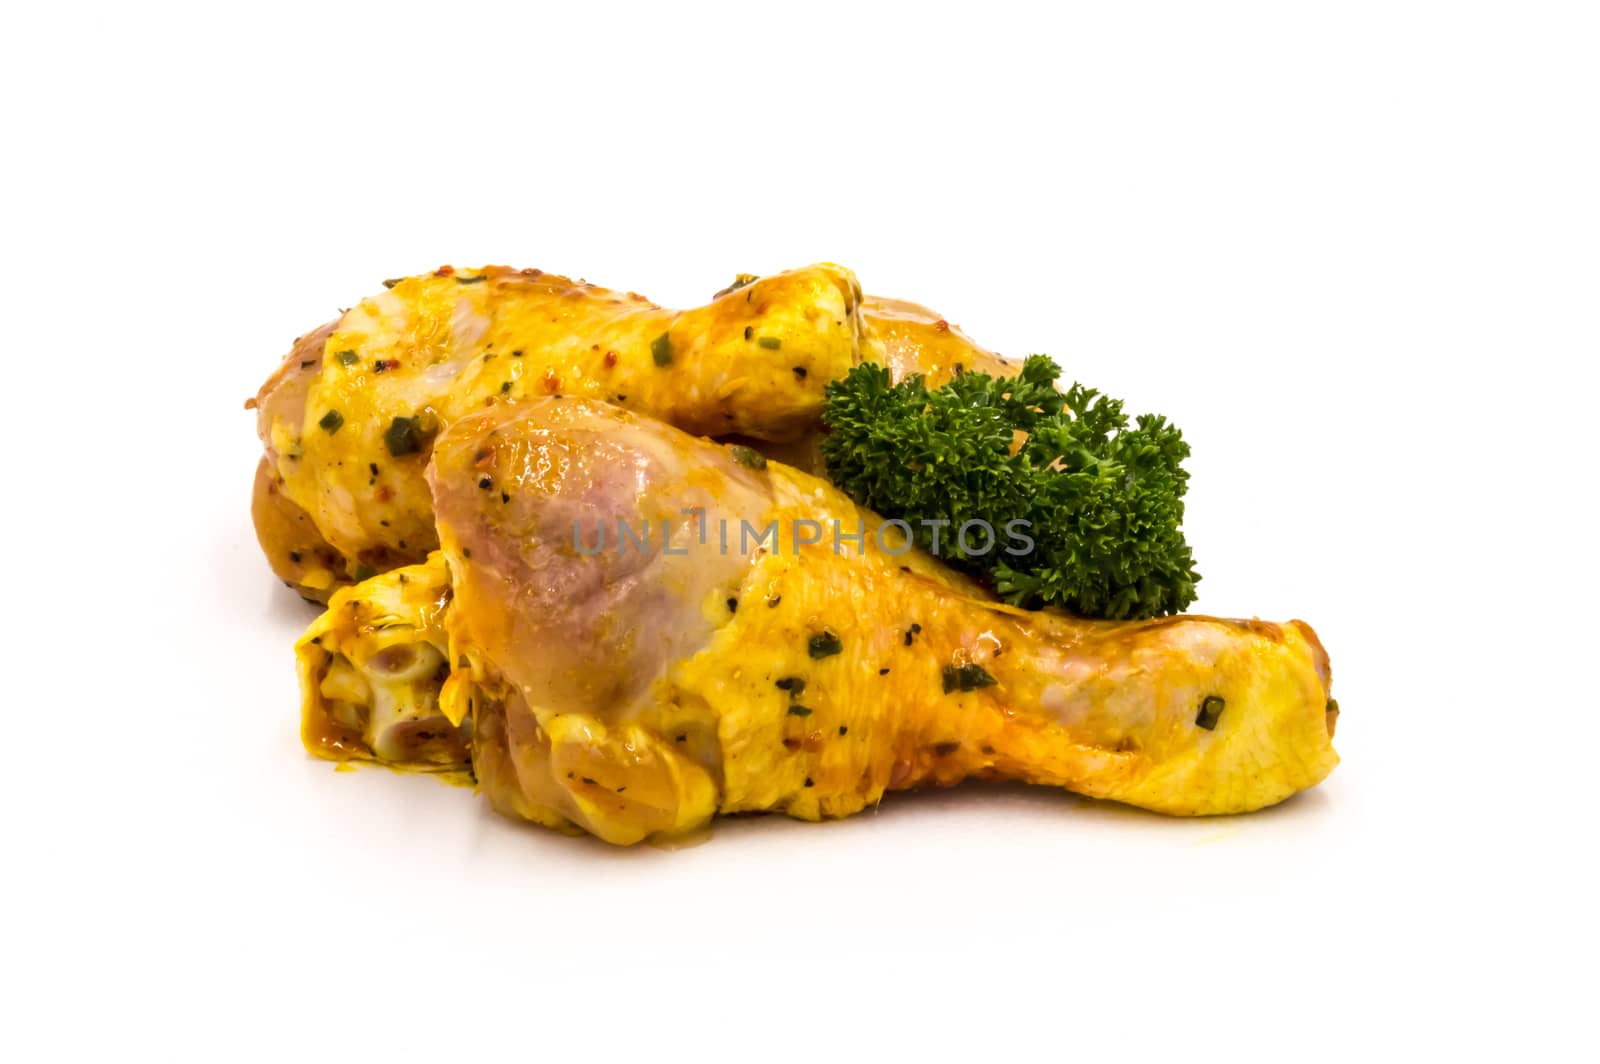 Chicken drumsticks marinate with parsley on a white background